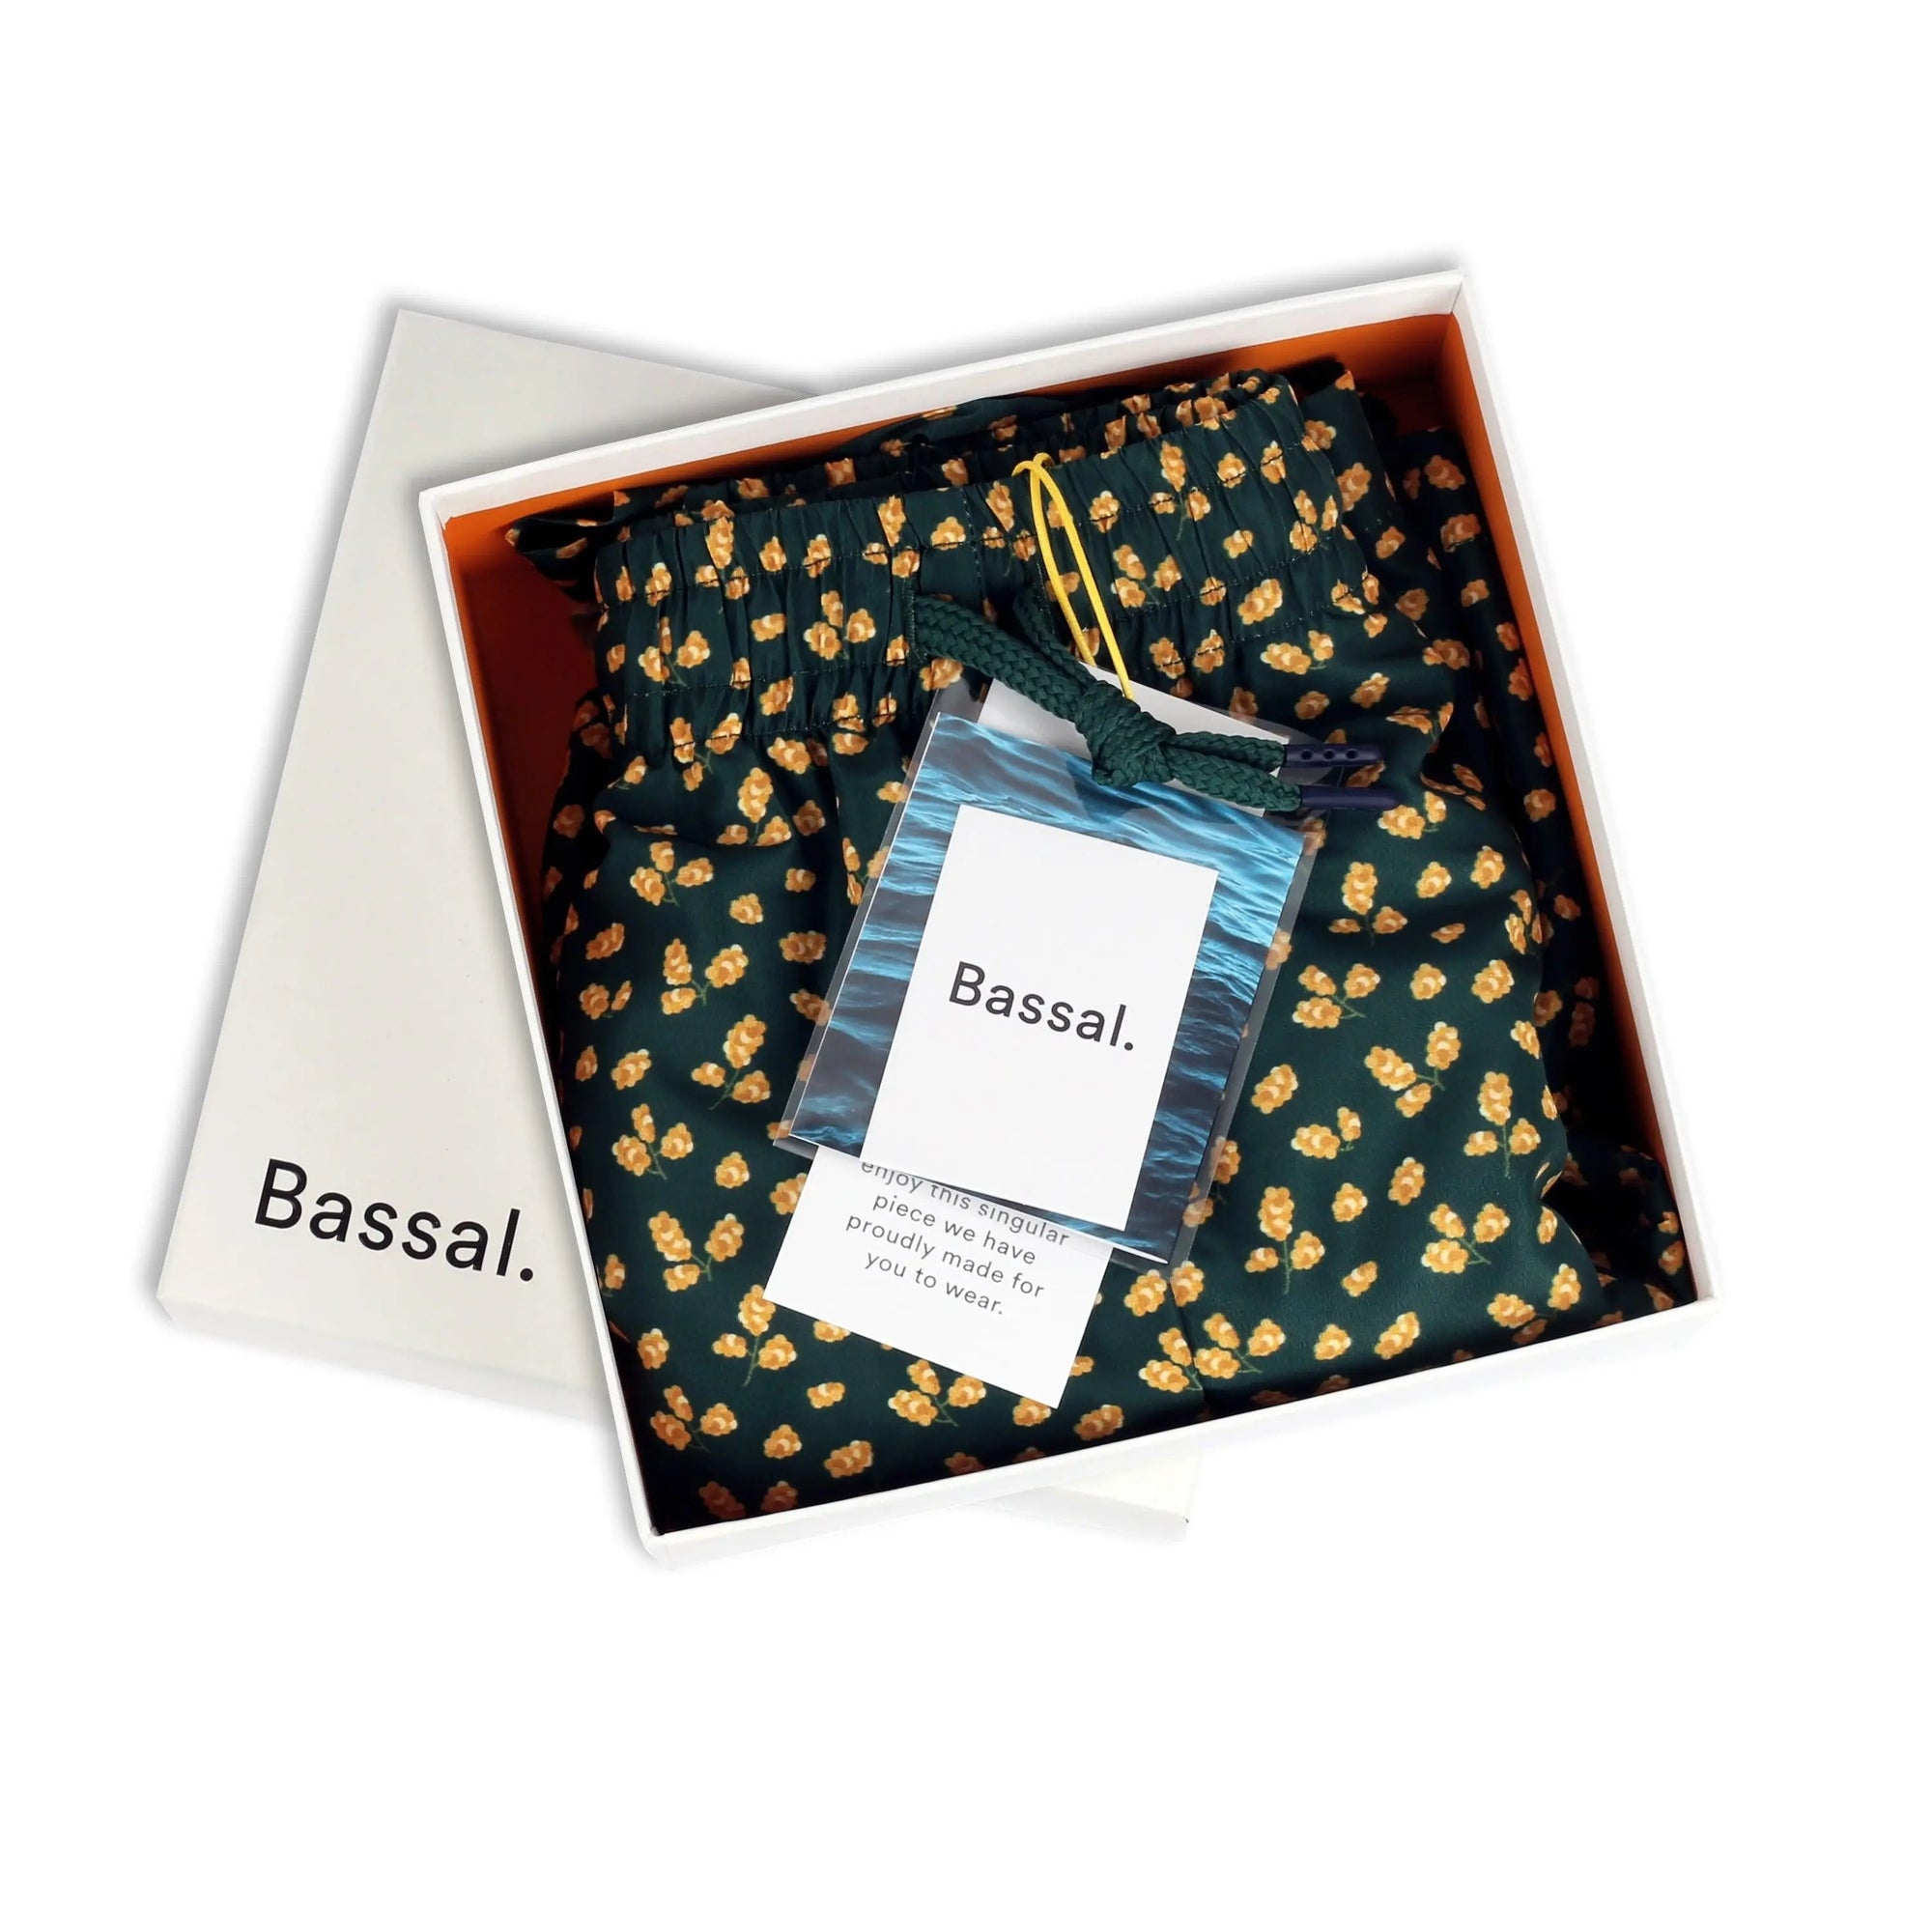 An open white box labeled "Bassal" reveals neatly folded dark green Mimosa Swimwear adorned with a yellow floral pattern. A smaller card with text lies on the swimwear, along with a small zipped bag containing a blue item. Discover this and more unique pieces at bassalstore, your go-to shop in Barcelona.